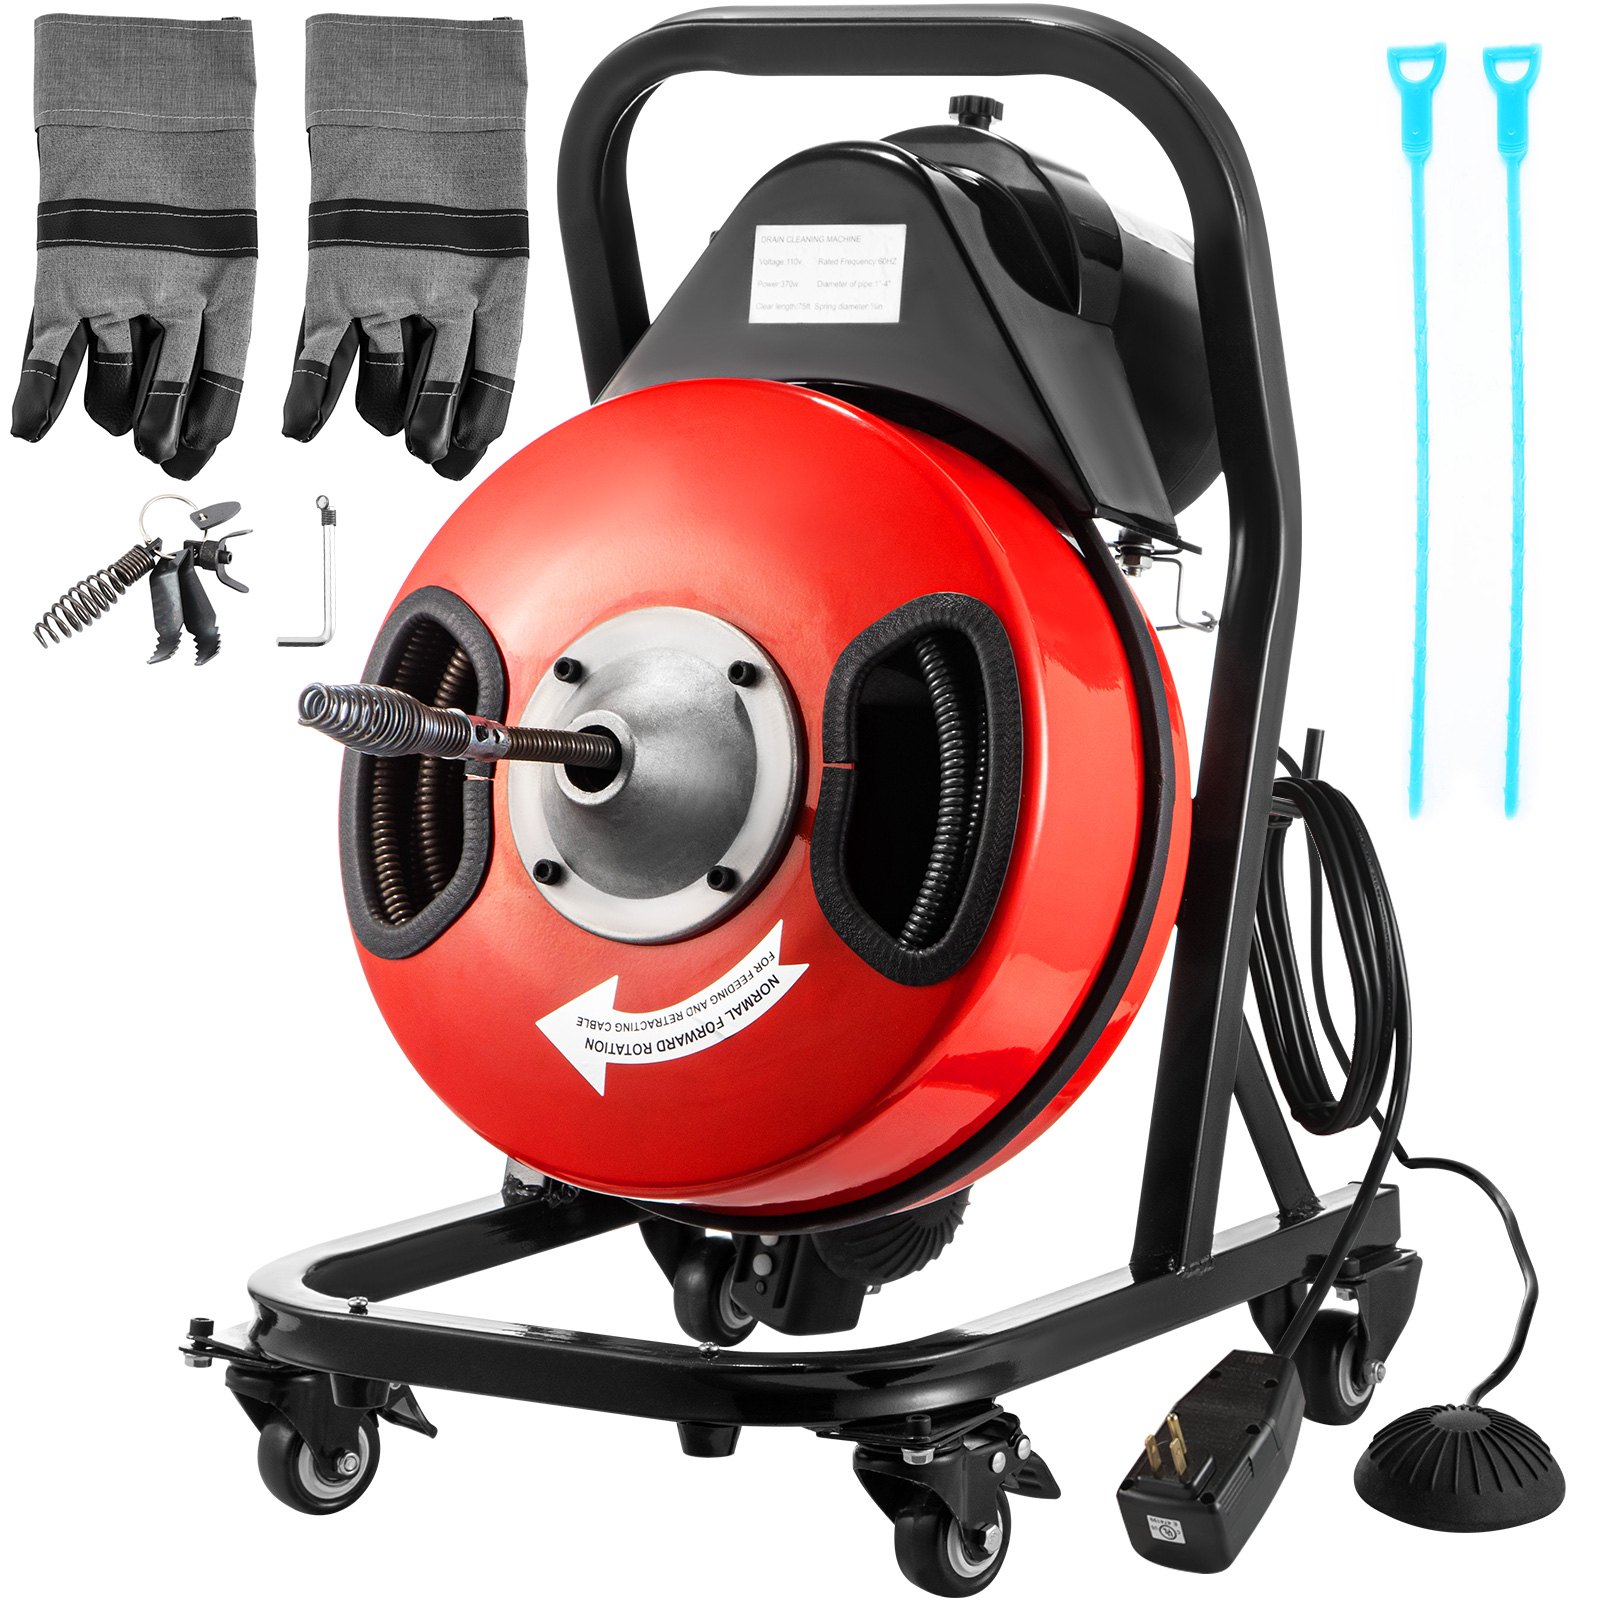 Drain Cleaner Machine Electric Drain Auger 50ftx1/2in Cable 370w W/wheels от Vevor Many GEOs